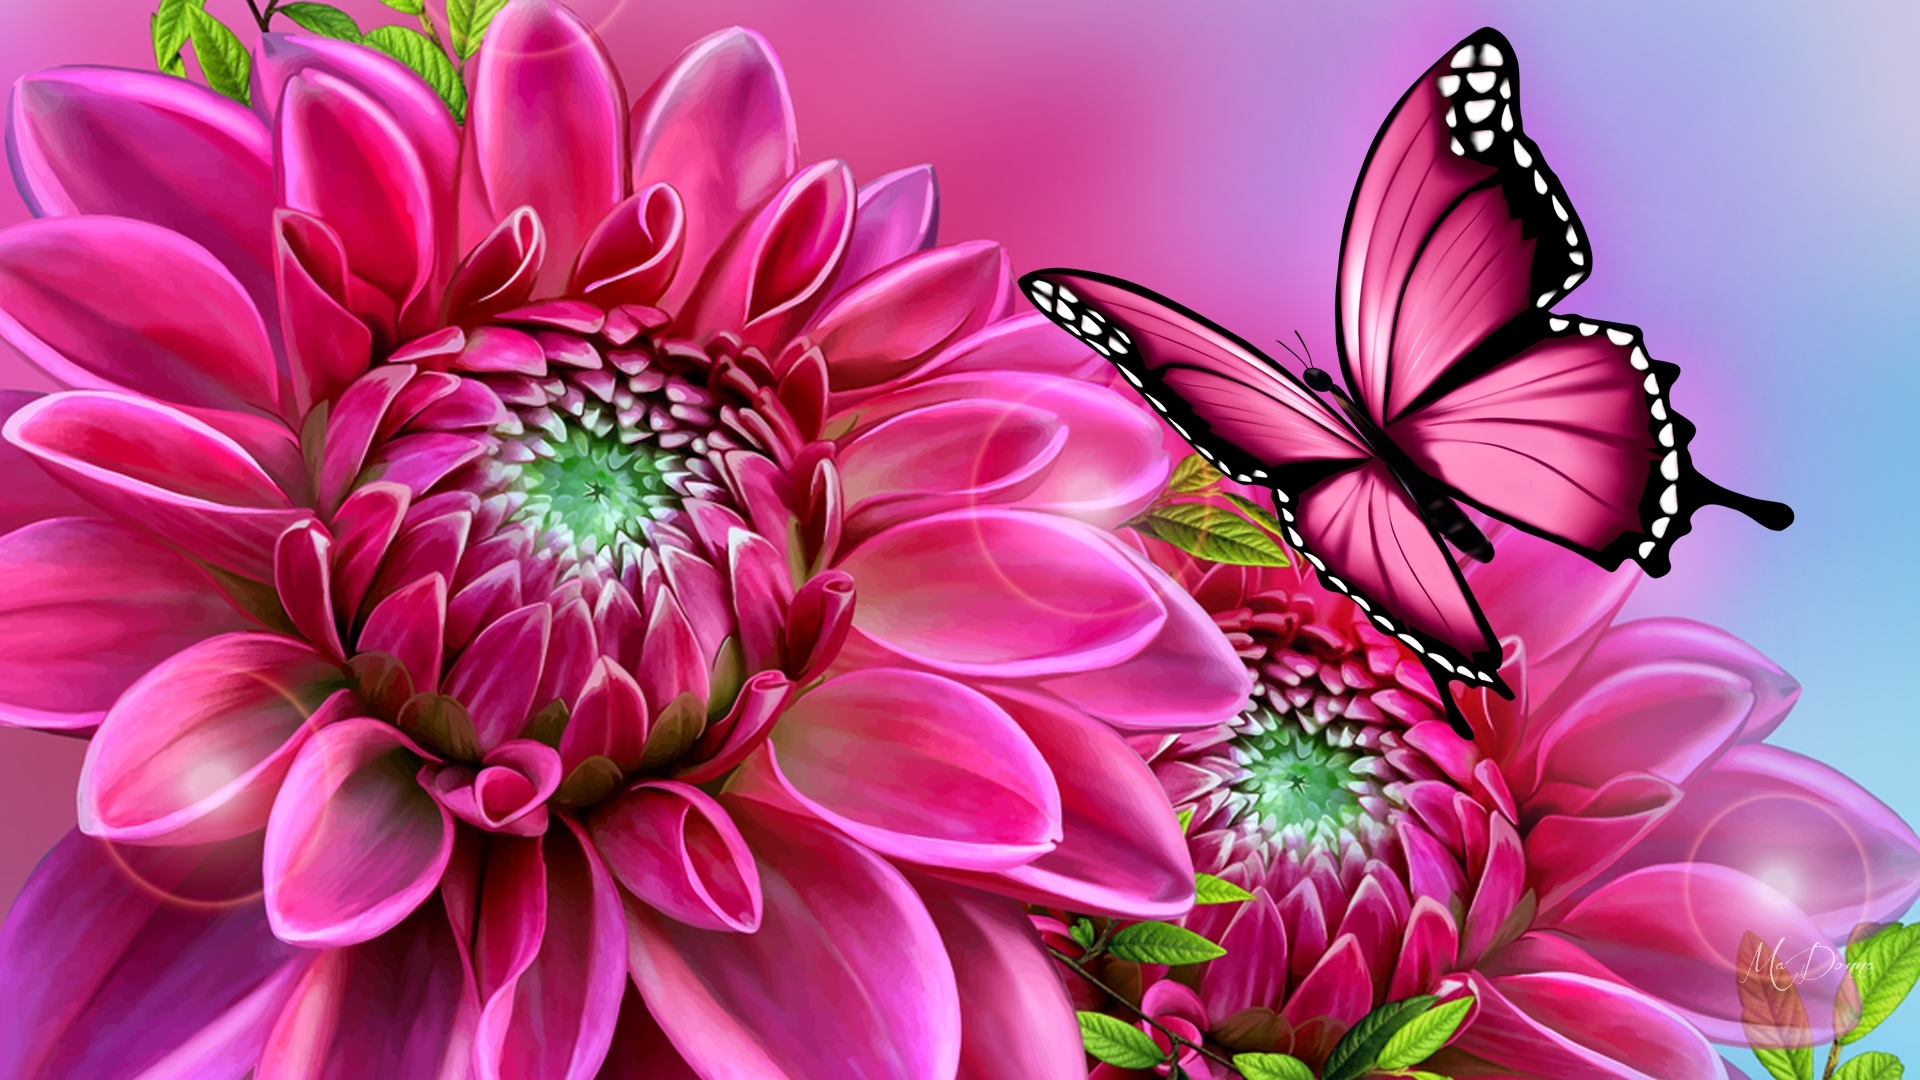 Beautiful Flowers Pink Dahlia And Butterfly : 